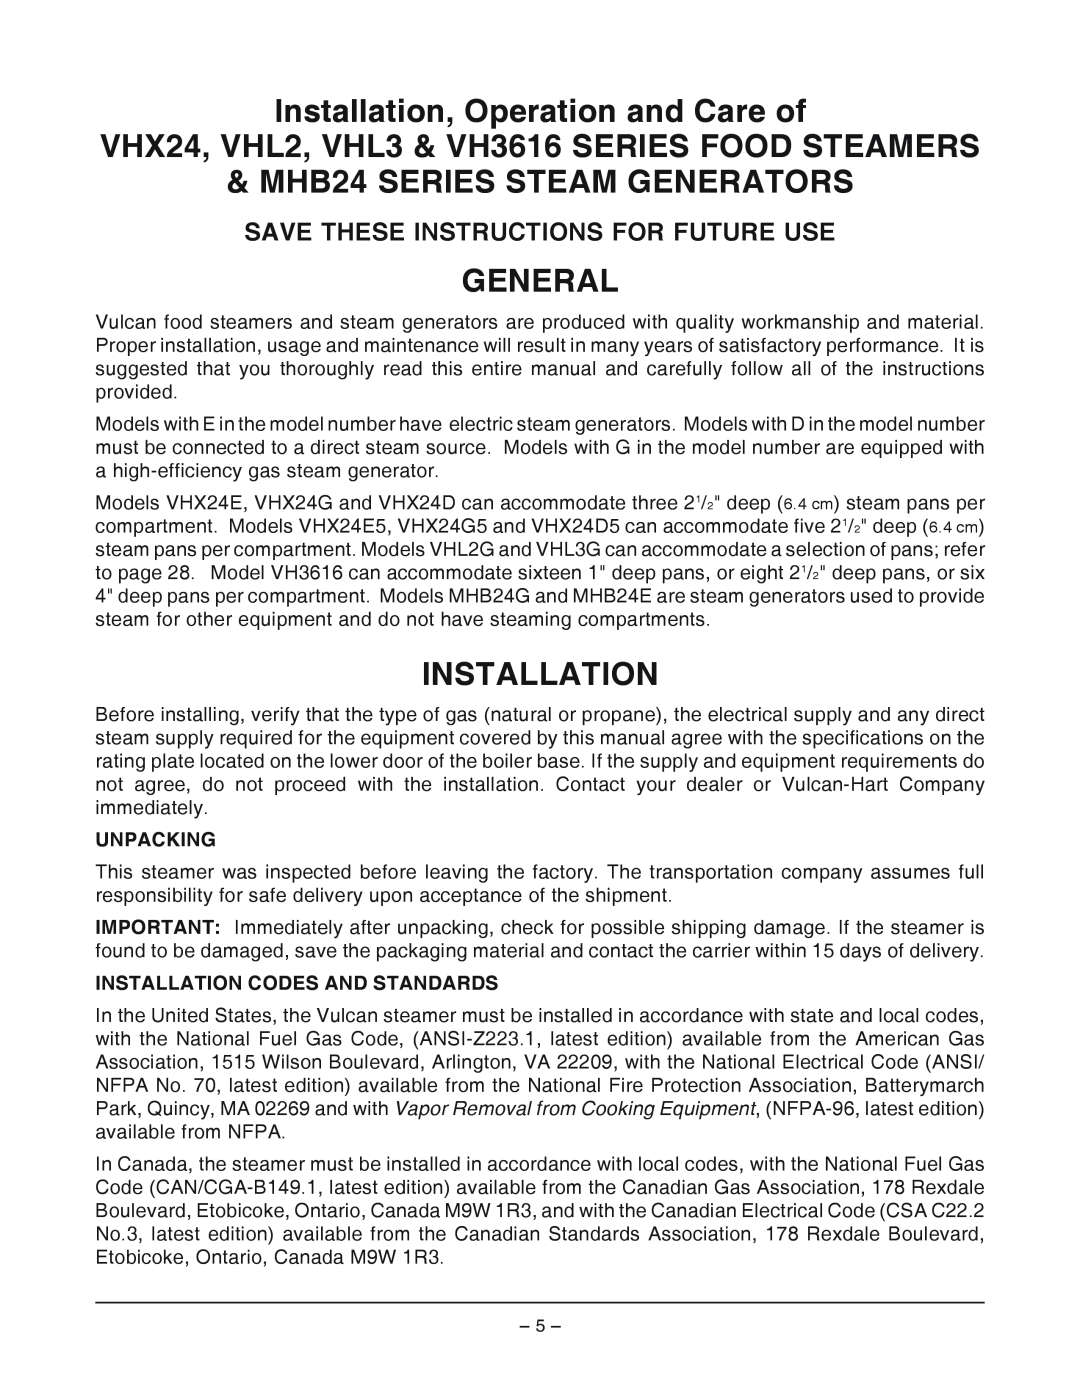 Vulcan-Hart Installation, Operation and Care of, VHX24, VHL2, VHL3 & VH3616 SERIES FOOD STEAMERS, General, Unpacking 